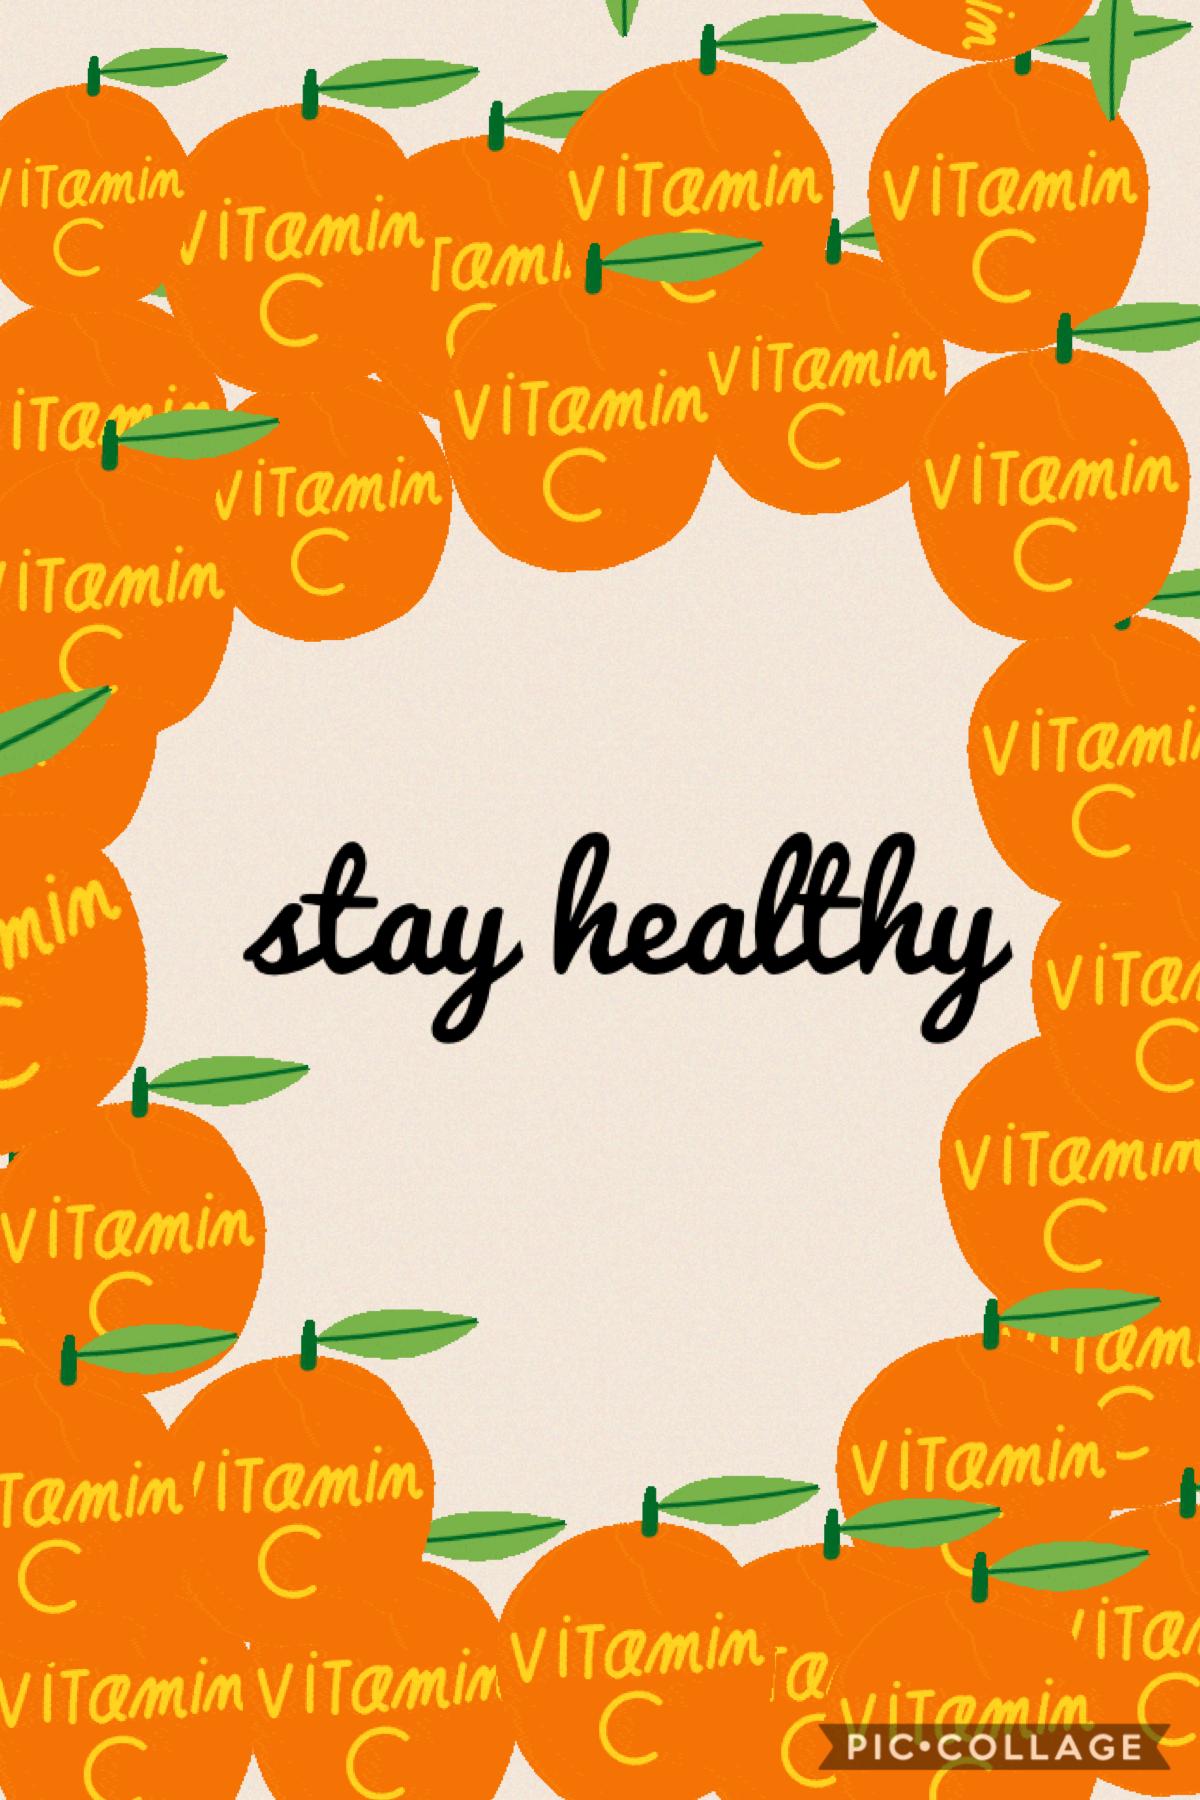 🍊TAP🍊

HEYA GUYS. i’m so sorry i haven’t posted for a while. i’ve been busy with online school. make sure ya stay healthy!!!! 